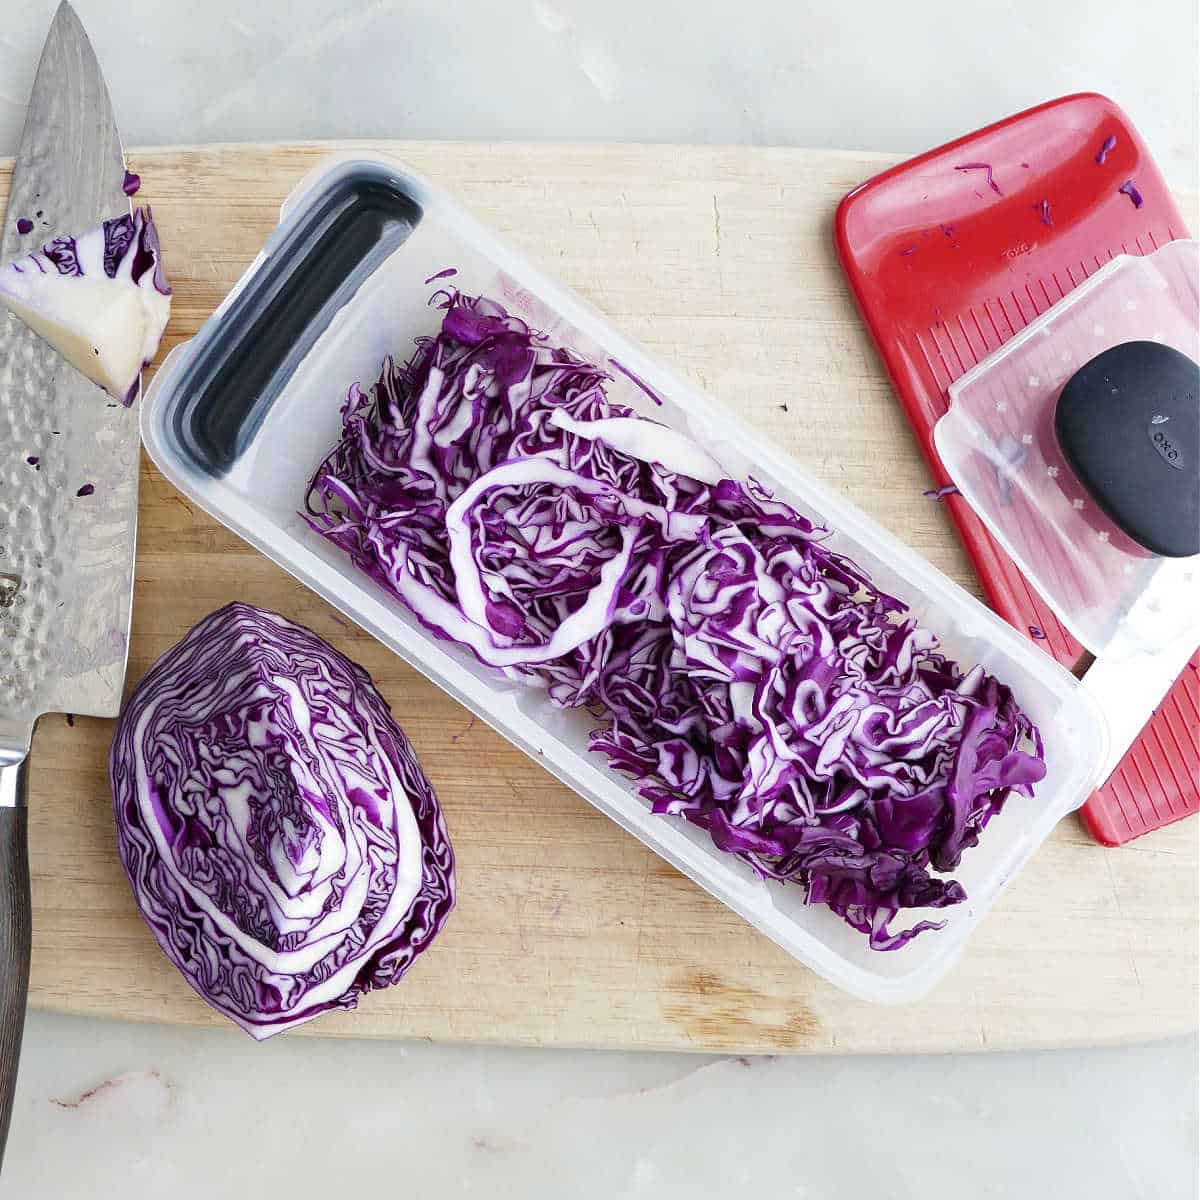 Red cabbage that was shredded with a mandoline on a cutting board.